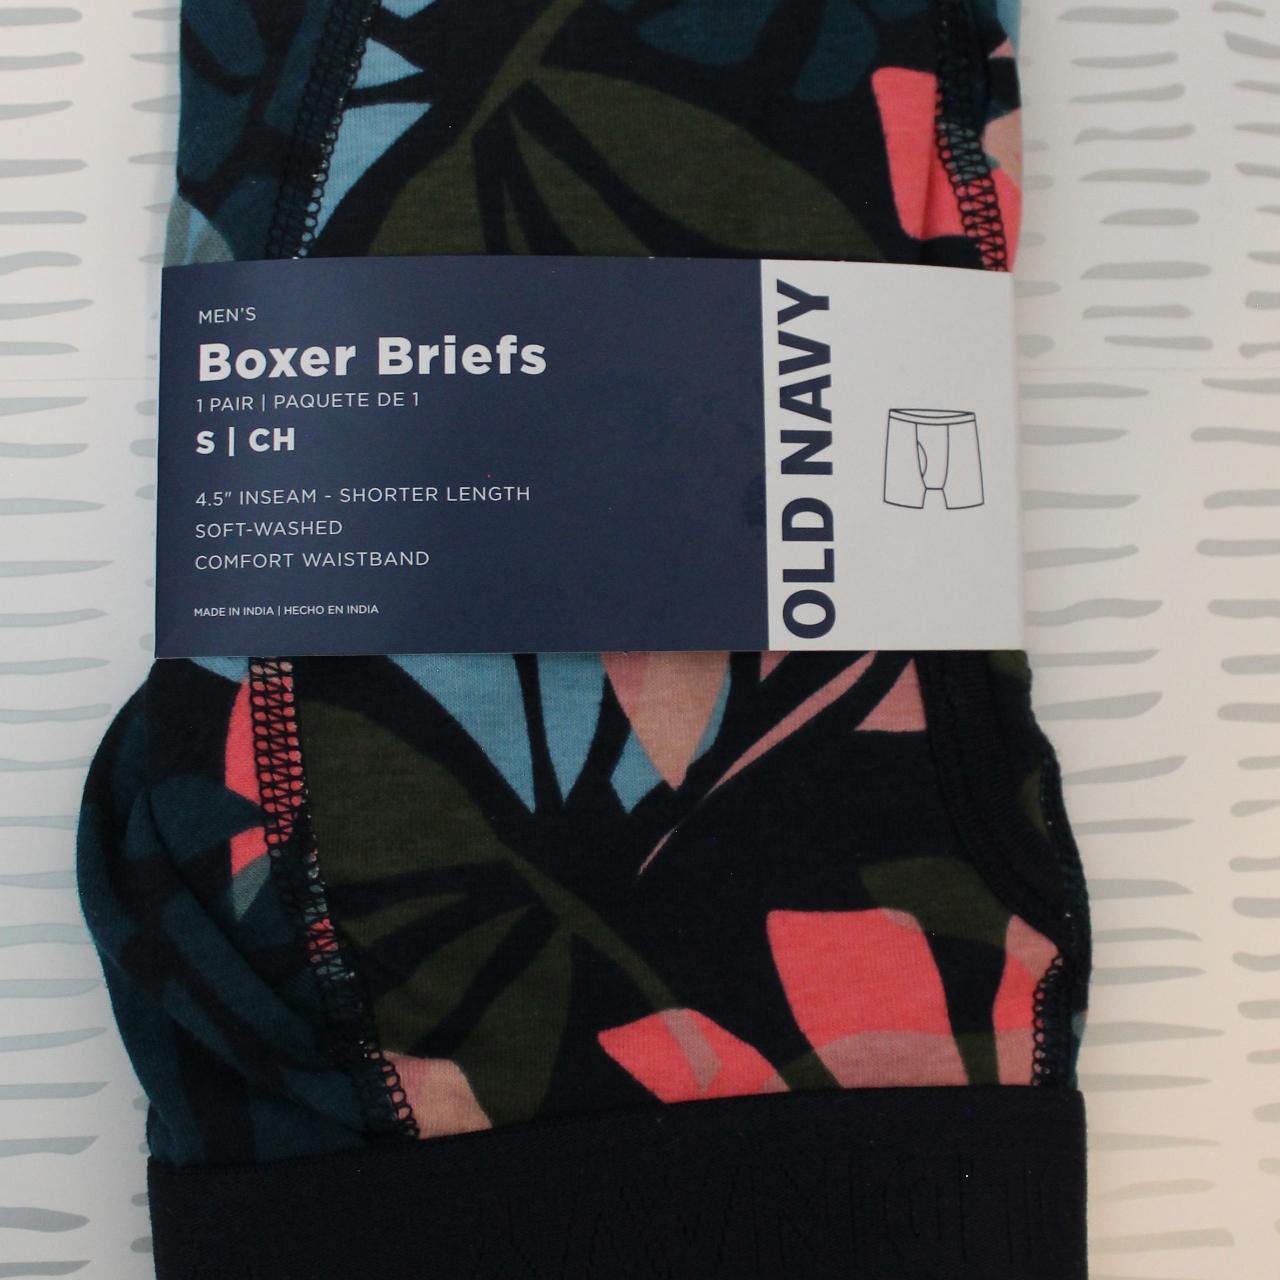 Soft-Washed Printed Boxers for Men